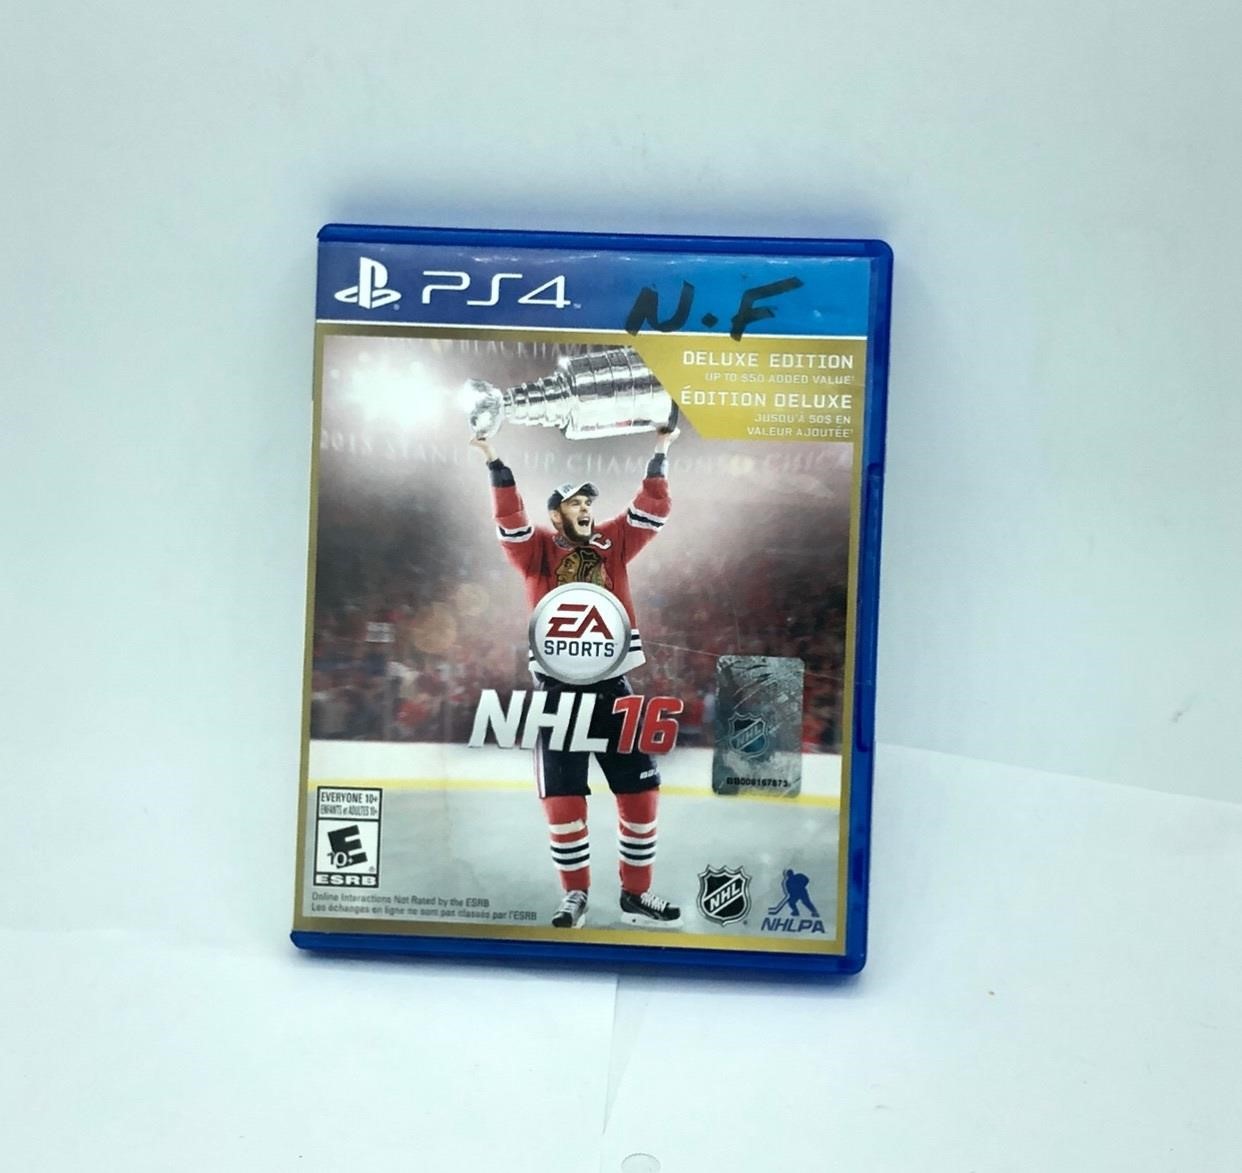 PS4 NFL 16 Deluxe Edition previously viewed